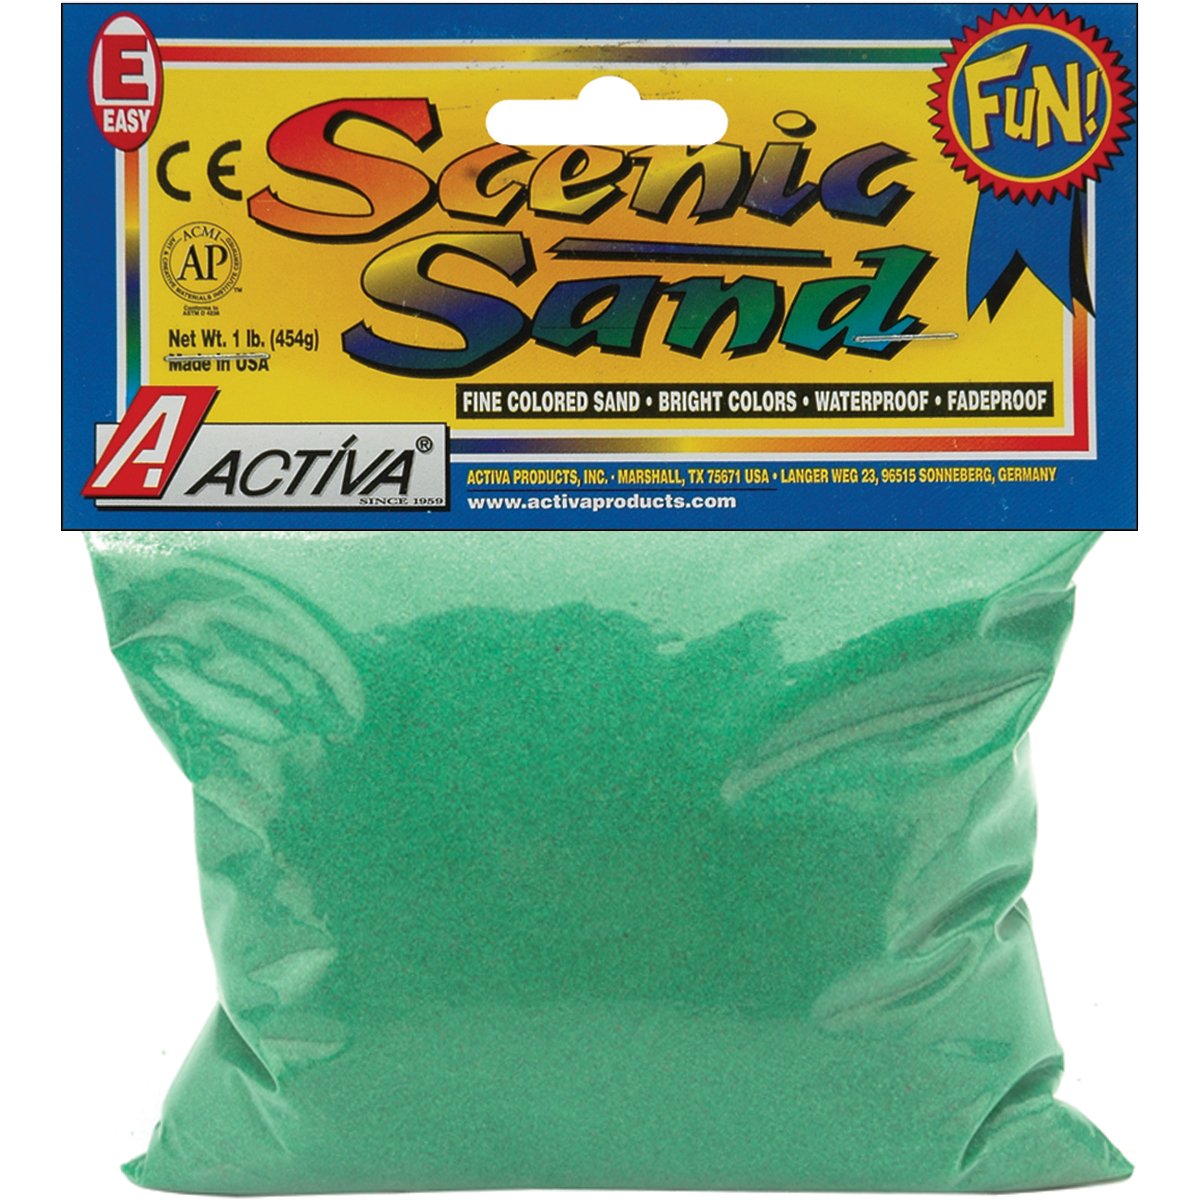 Activa Scenic Sand, 1 lb., Forest Green - image 2 of 2